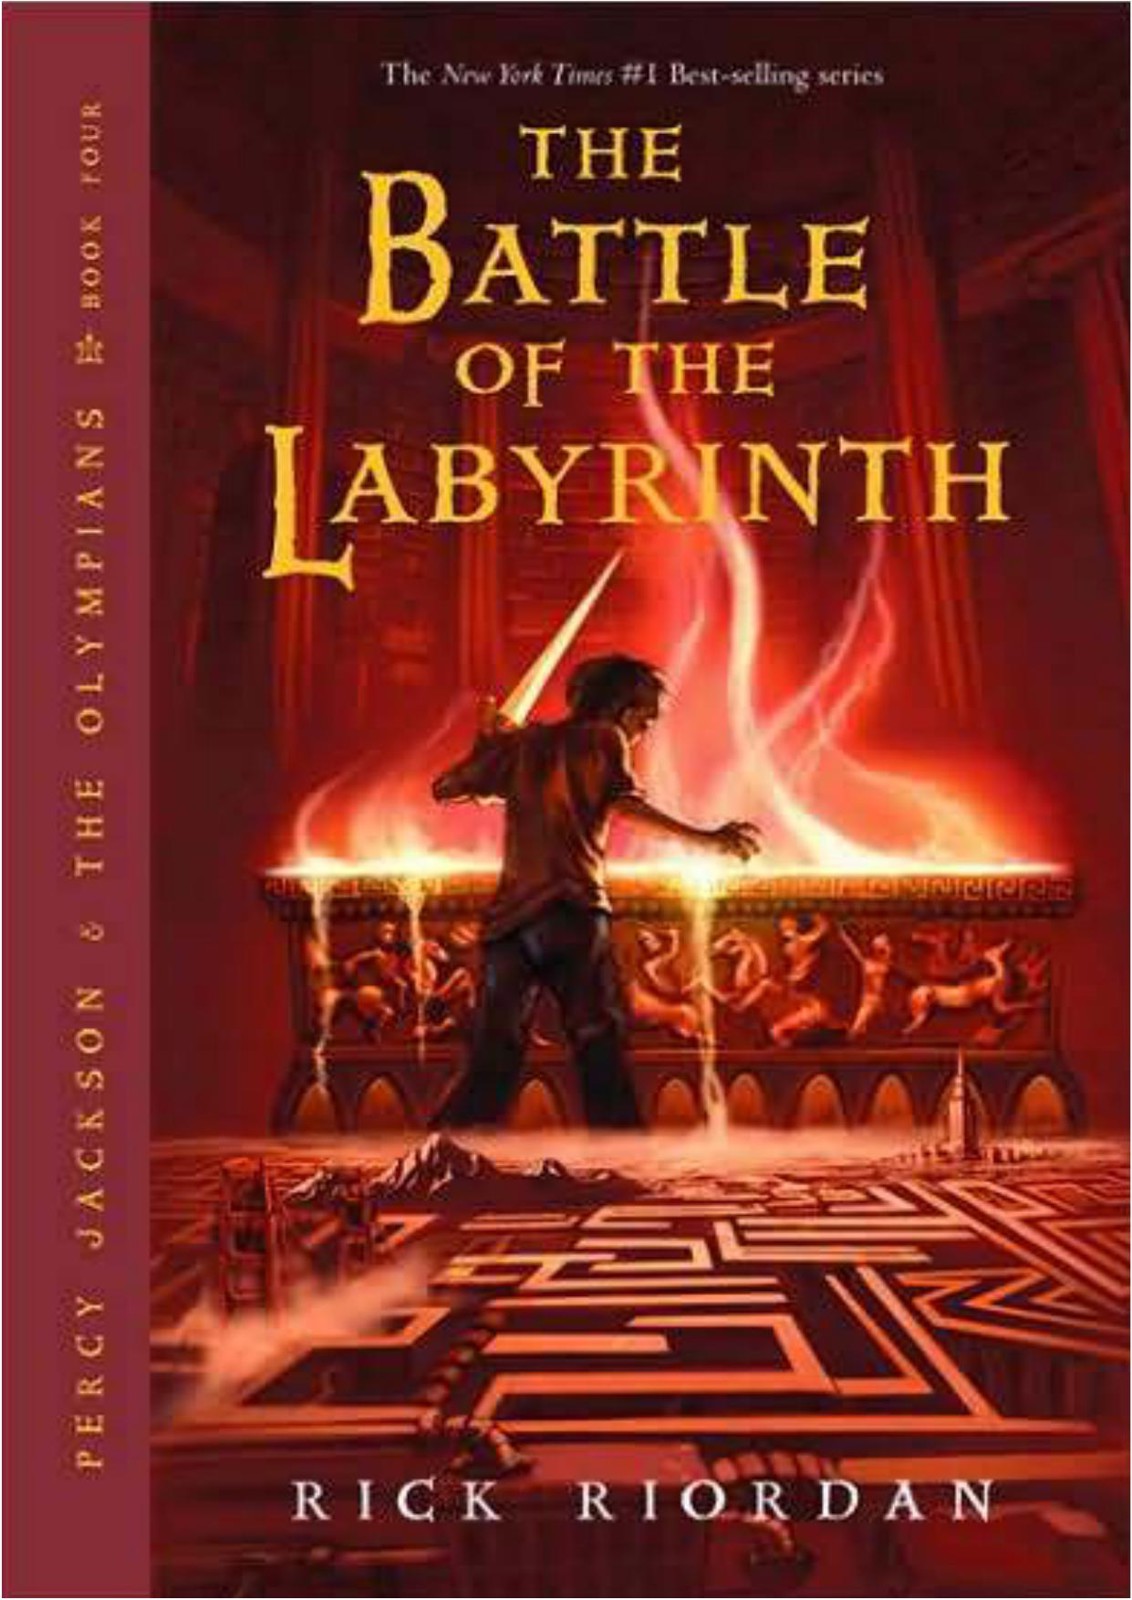 The Battle of the Labyrinth